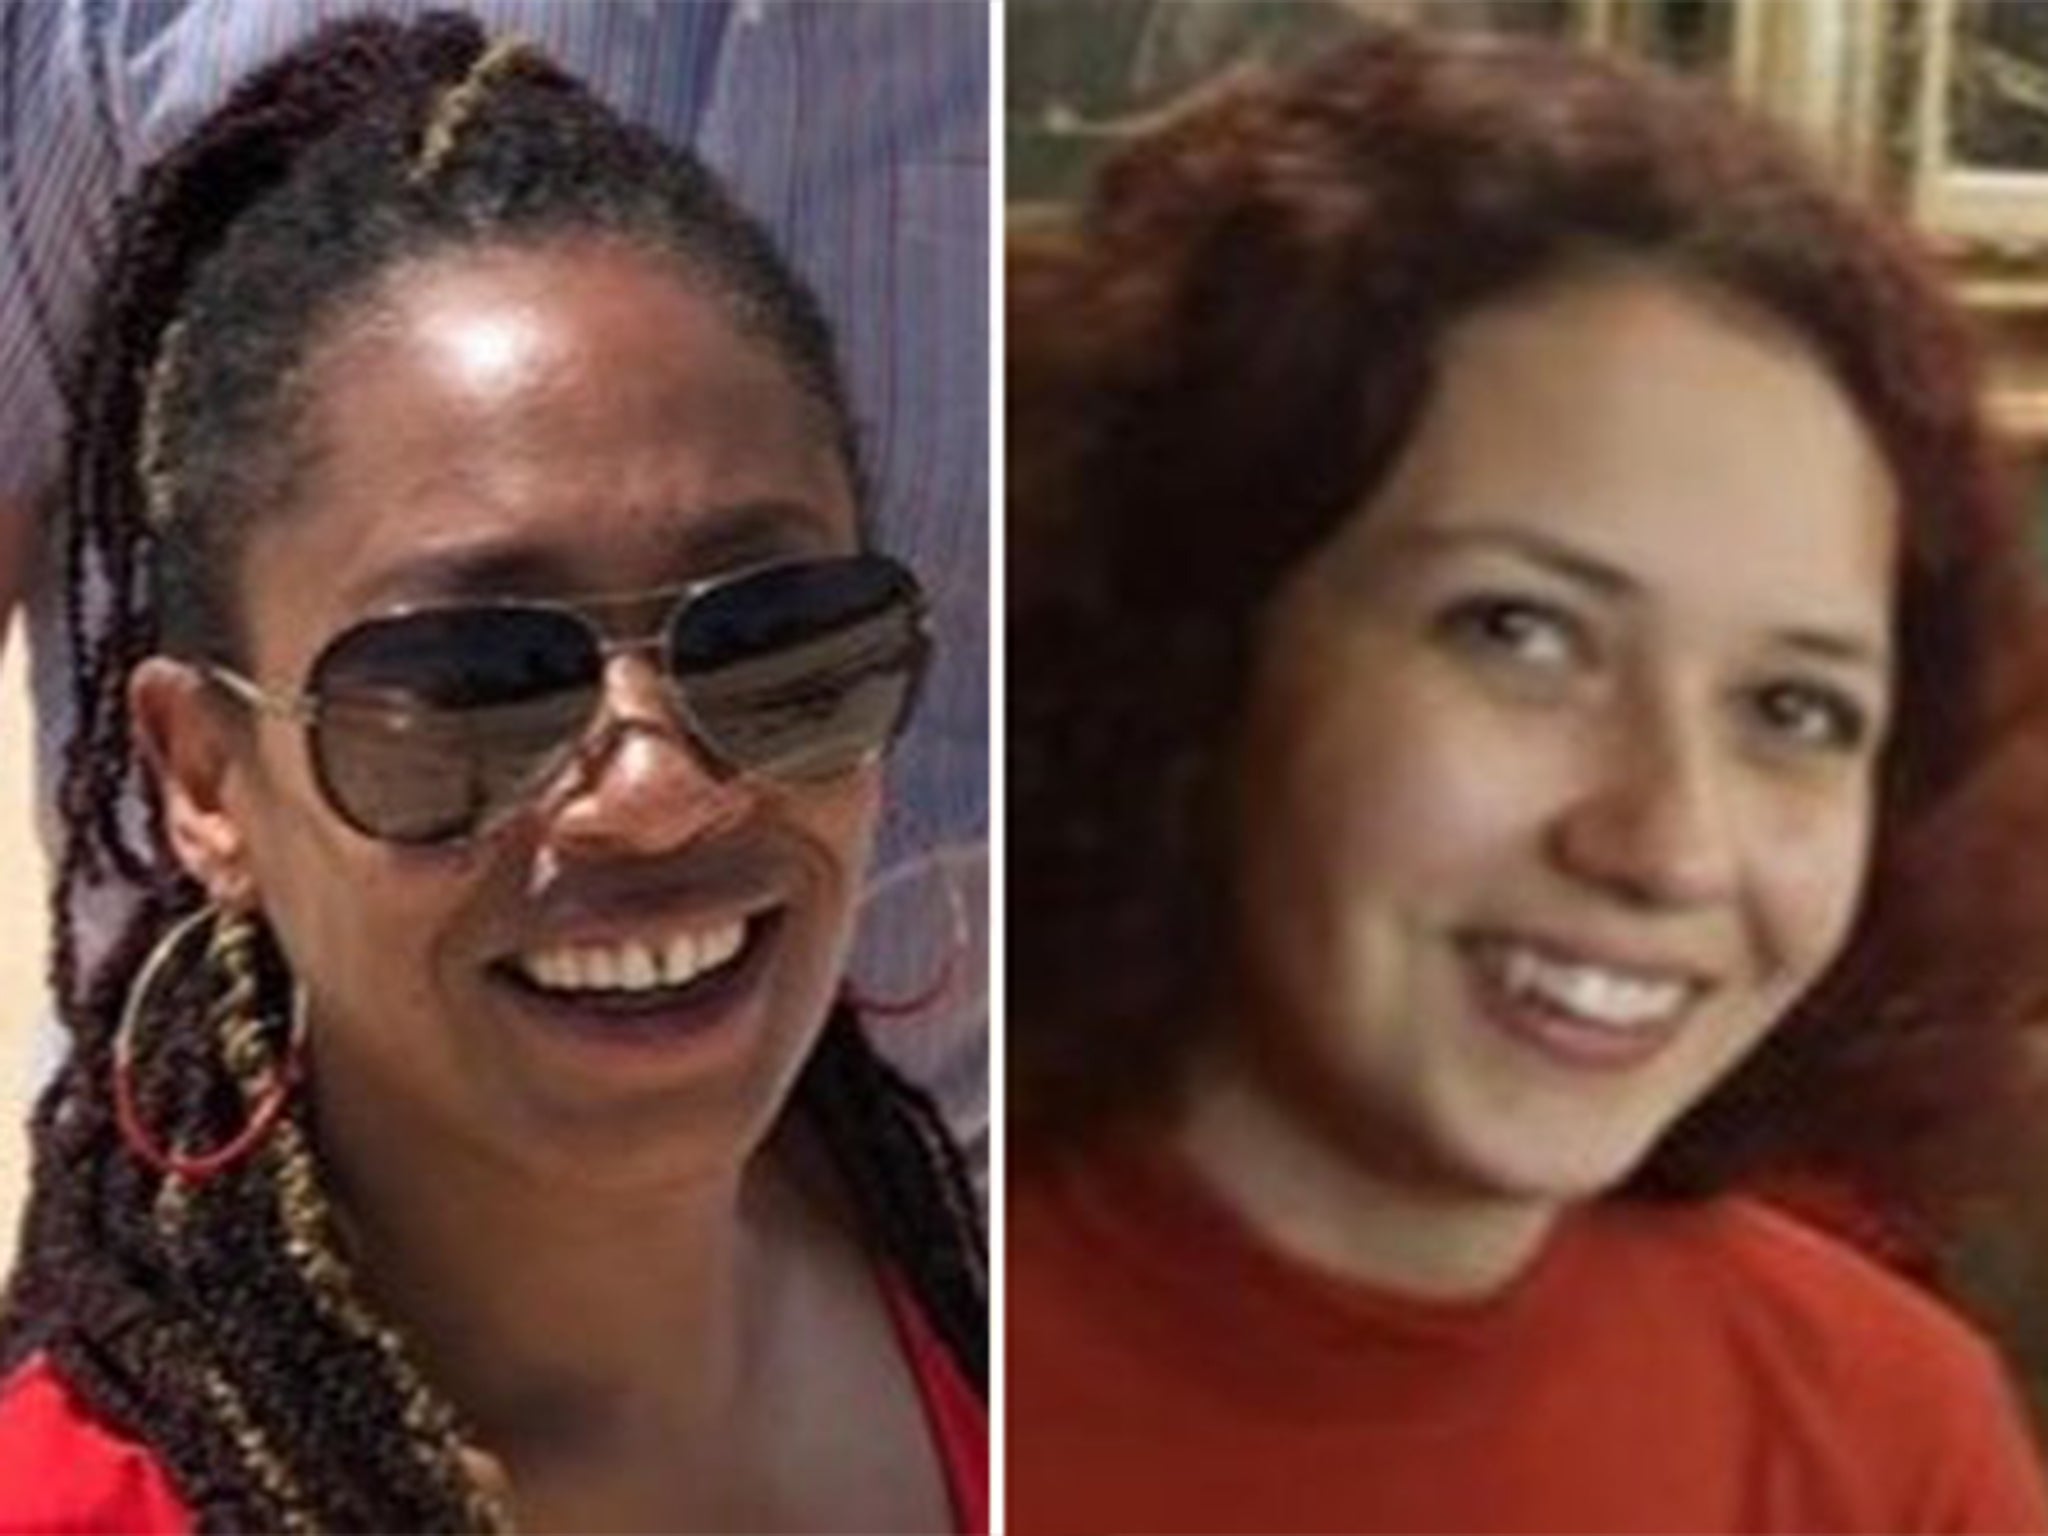 Police also faced criticism for their handling of the deaths of sisters Bibaa Henry and Nicole Smallman